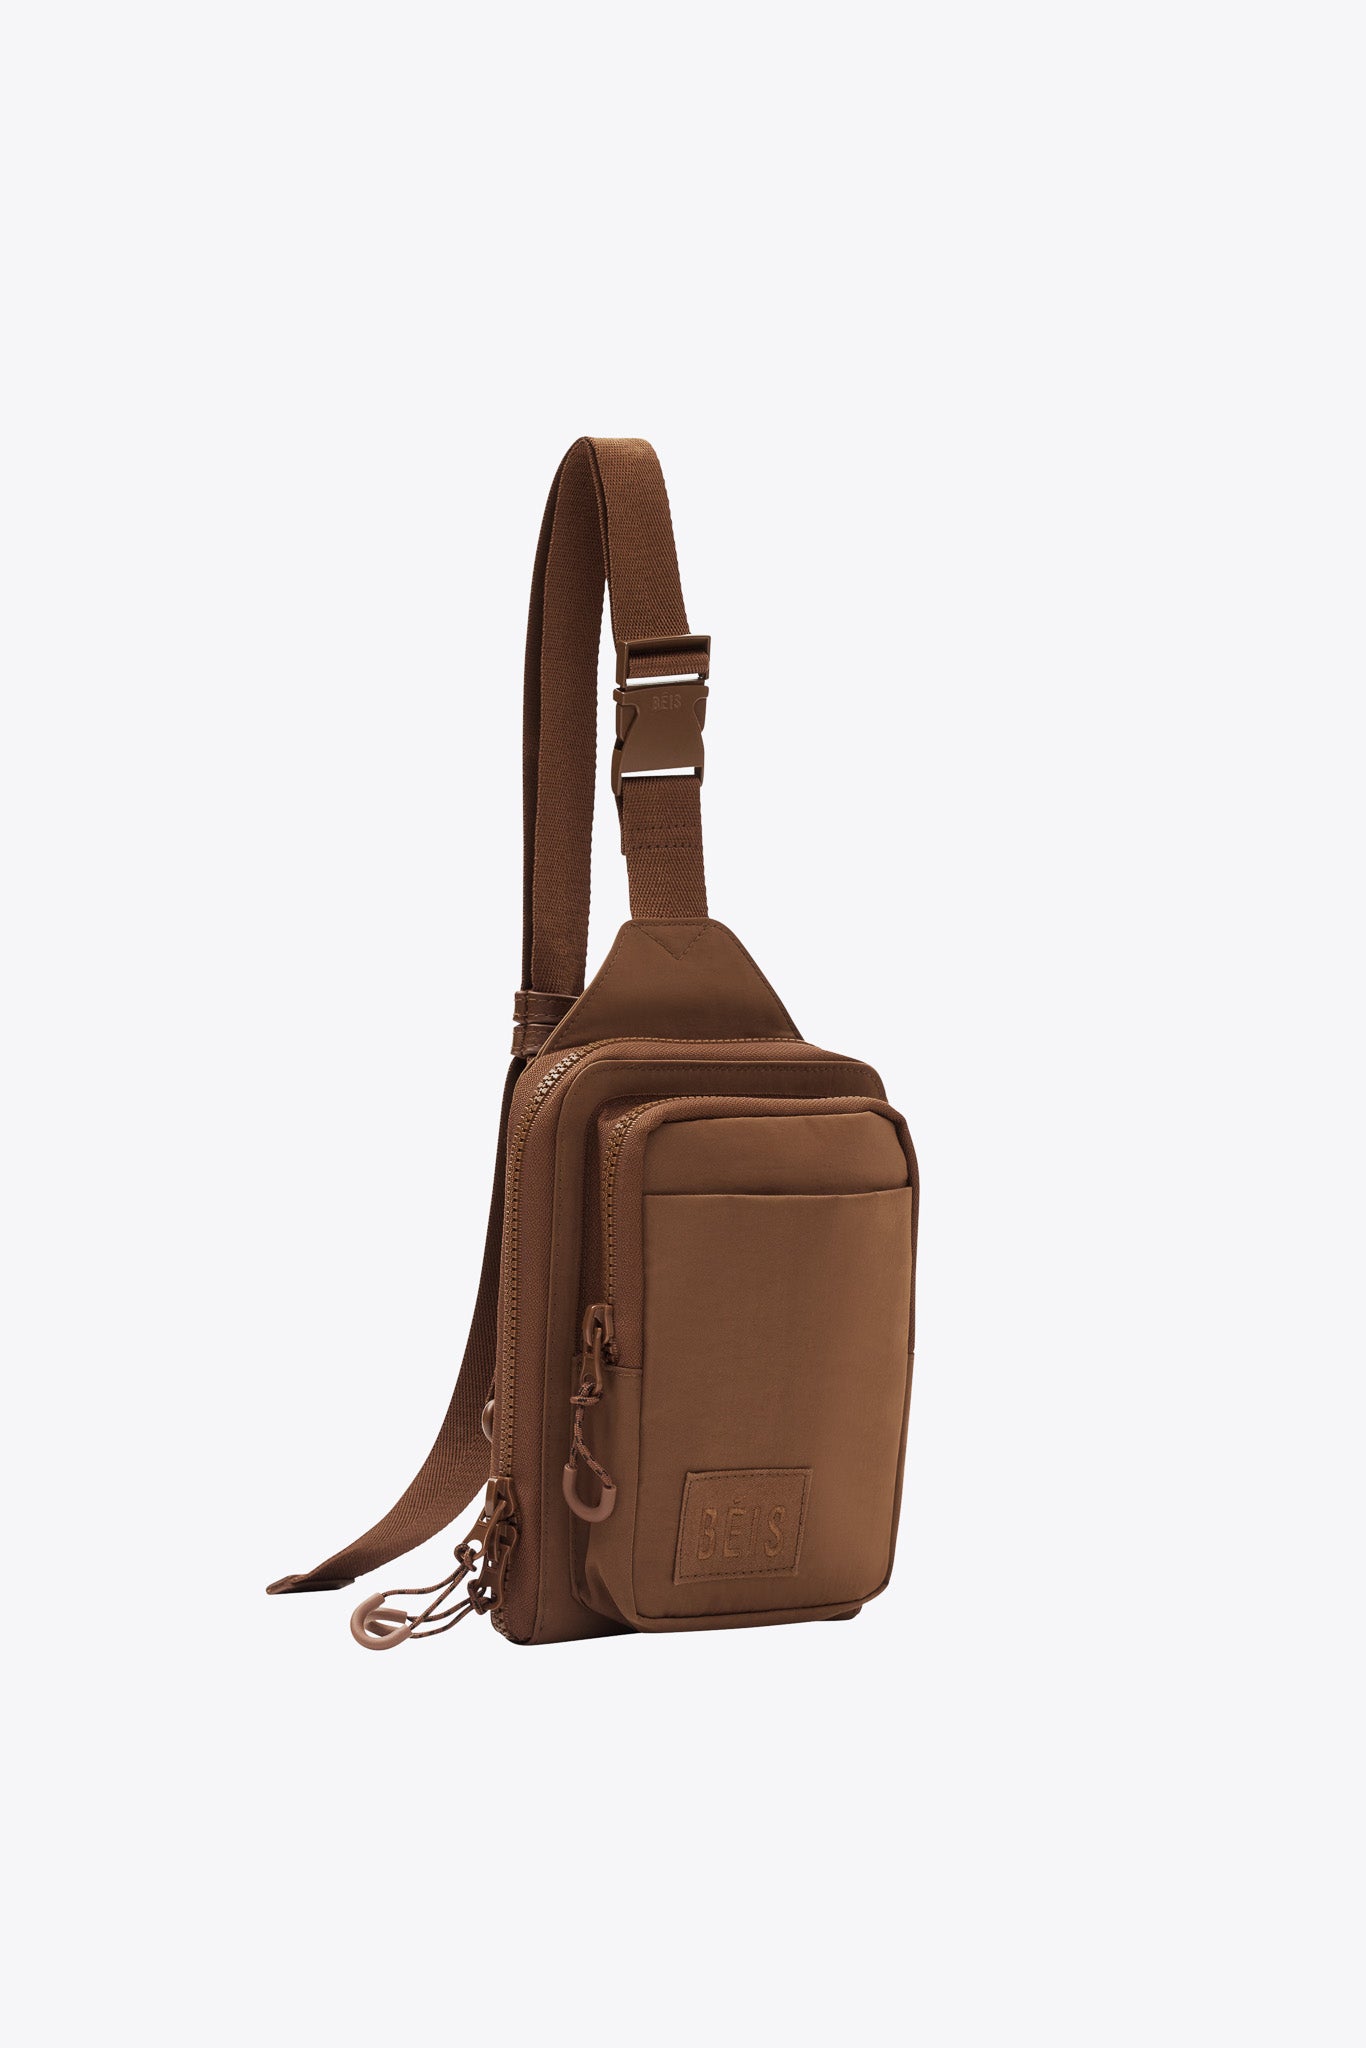 The Sport Sling in Maple